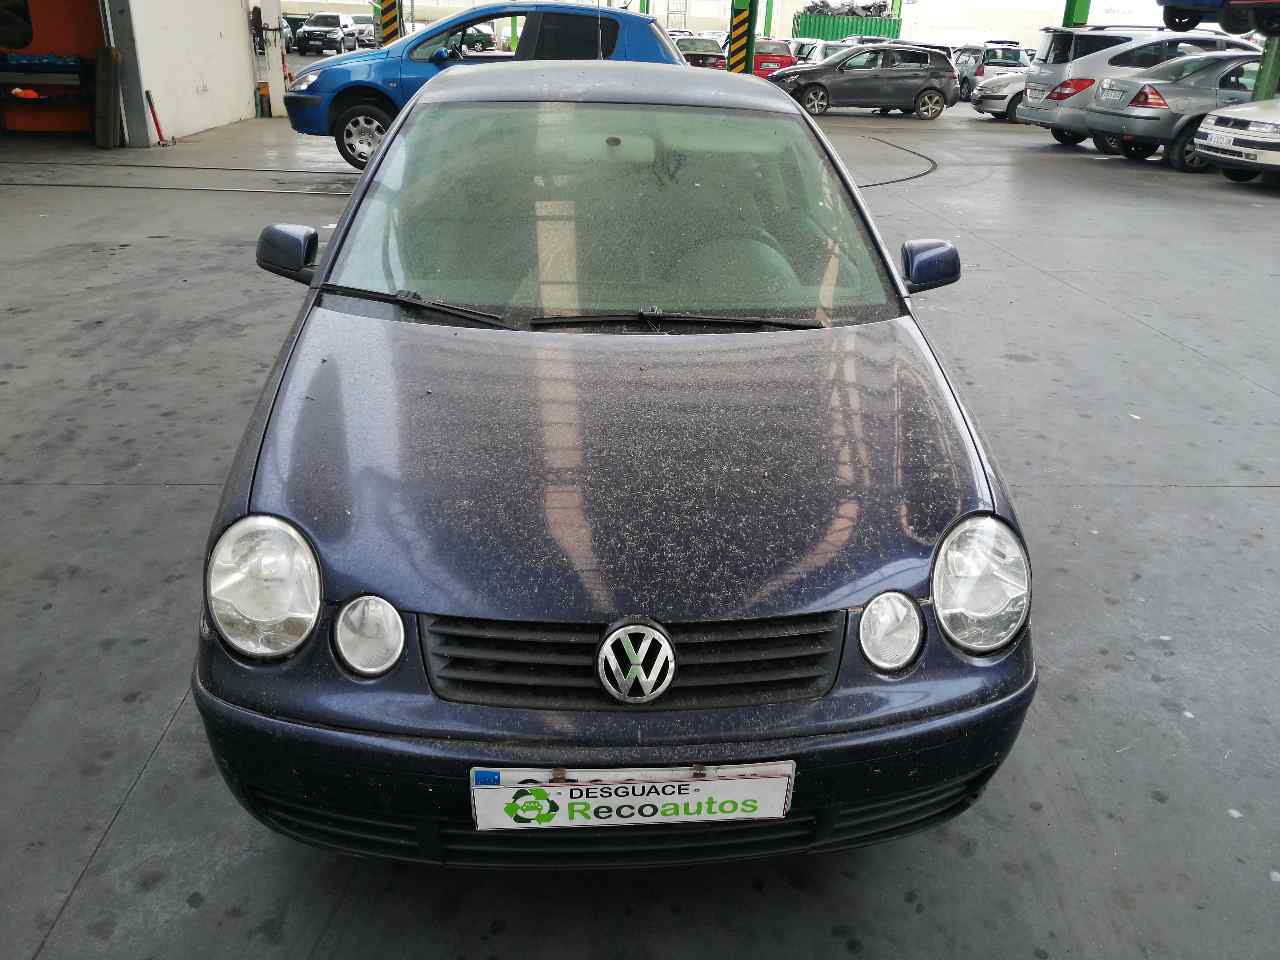 VOLKSWAGEN Polo 4 generation (2001-2009) Other Body Parts 6Q1721503B, 6PV00849501, HELLA 19816040